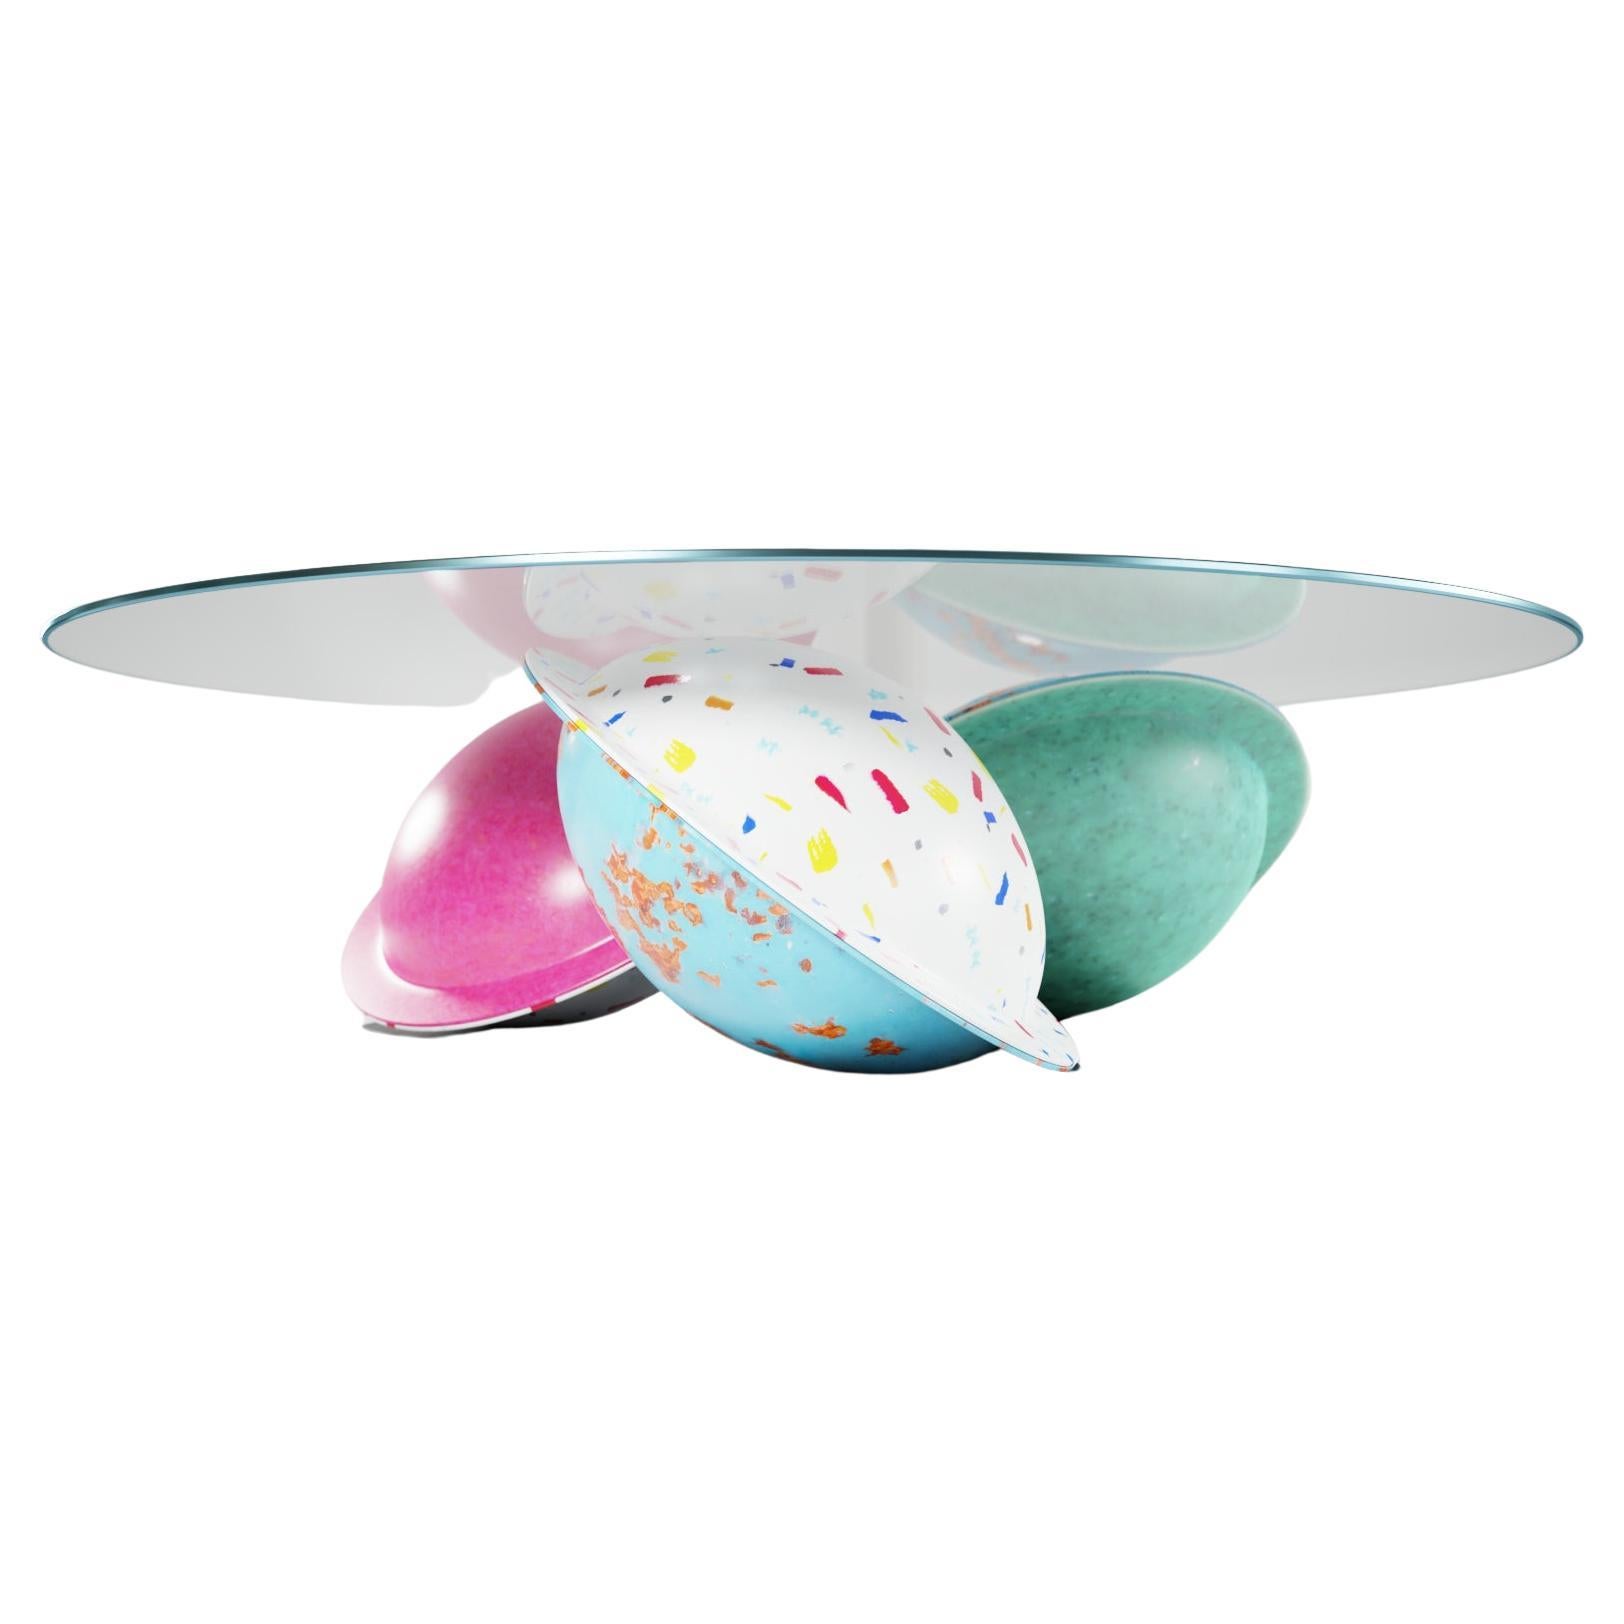 Ever playful, innovative design studio Duffy London exclusively unveils its latest conversational art-as-furniture piece, the retro-candy inspired Flying Saucer coffee table, brought to life using 100% recycled plastics in a series of pop colour